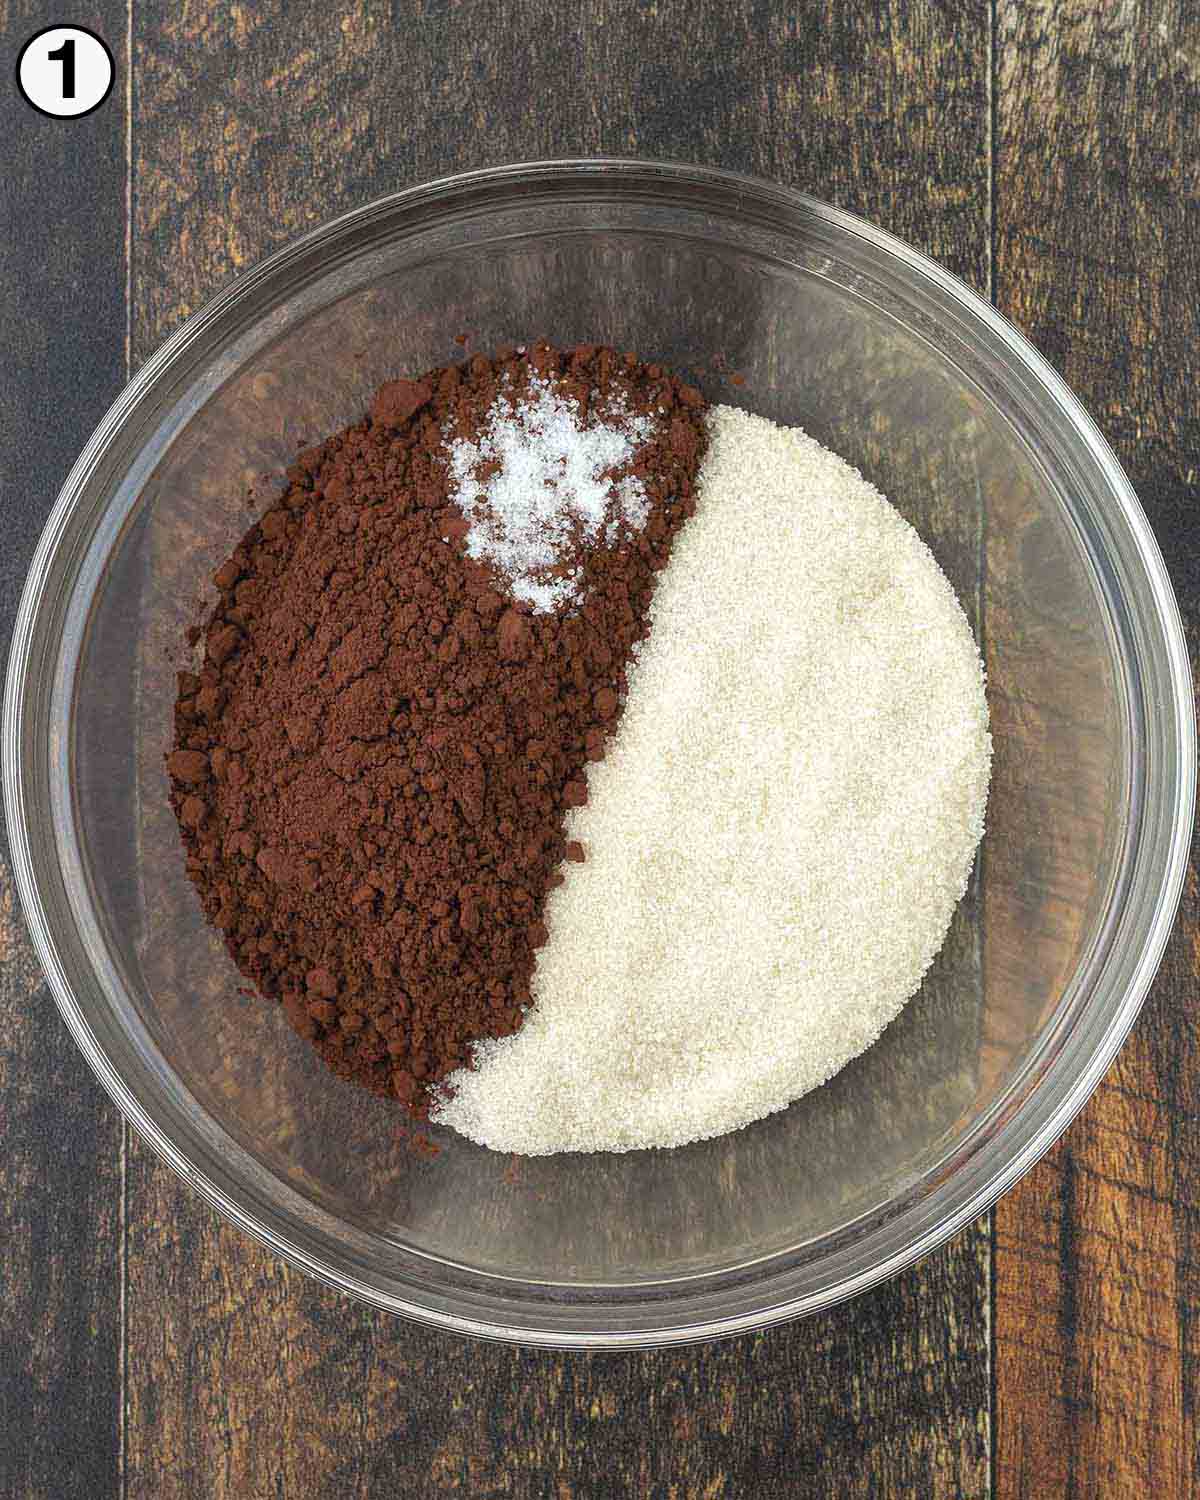 The three ingredients for hot cocoa mix in a glass bowl with a whisk.